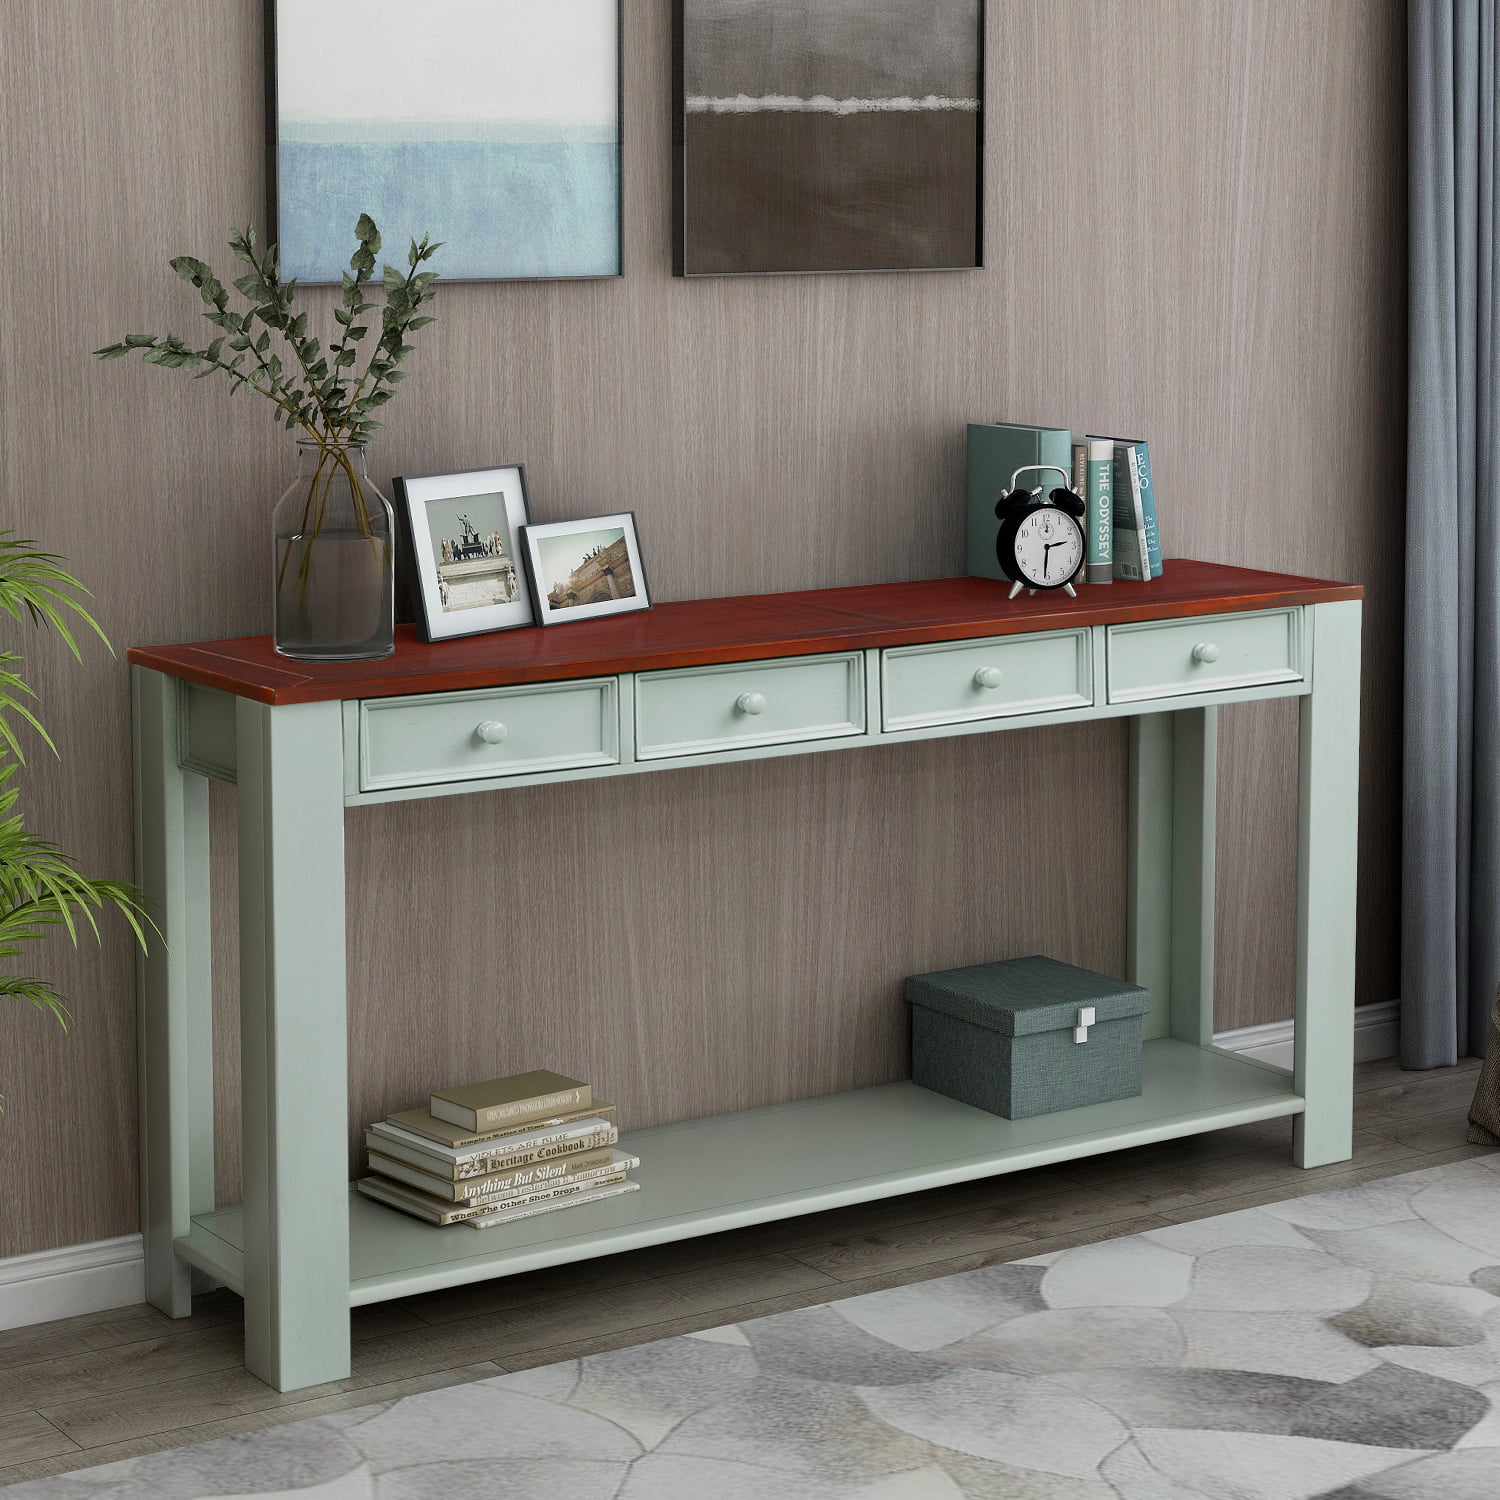 JUMPER 64" Console Table Retro Solid Wood Storage Console ...